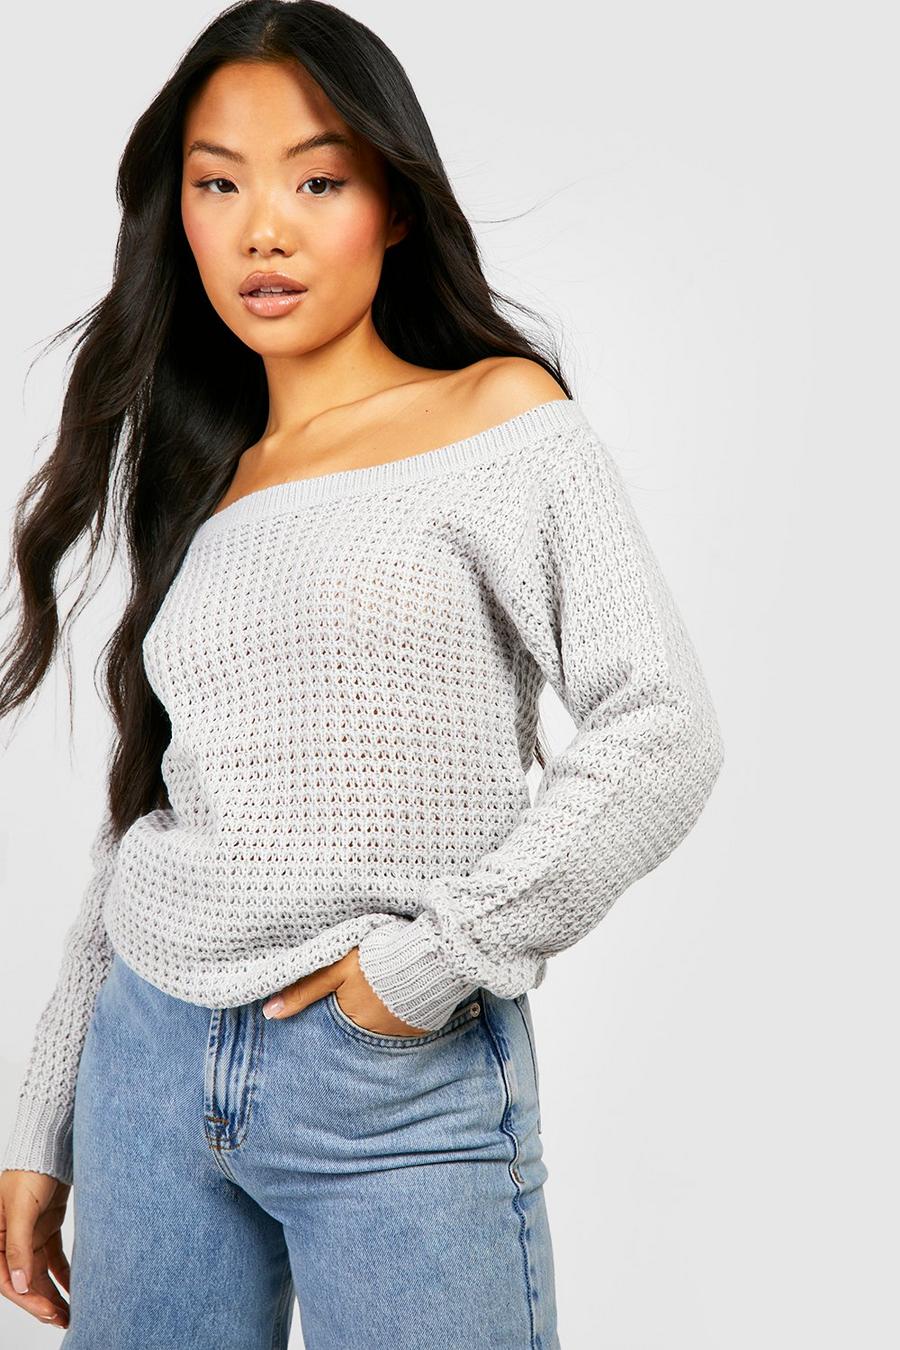 Grey Petite Waffle Knit Off The Shoulder Sweater Dress